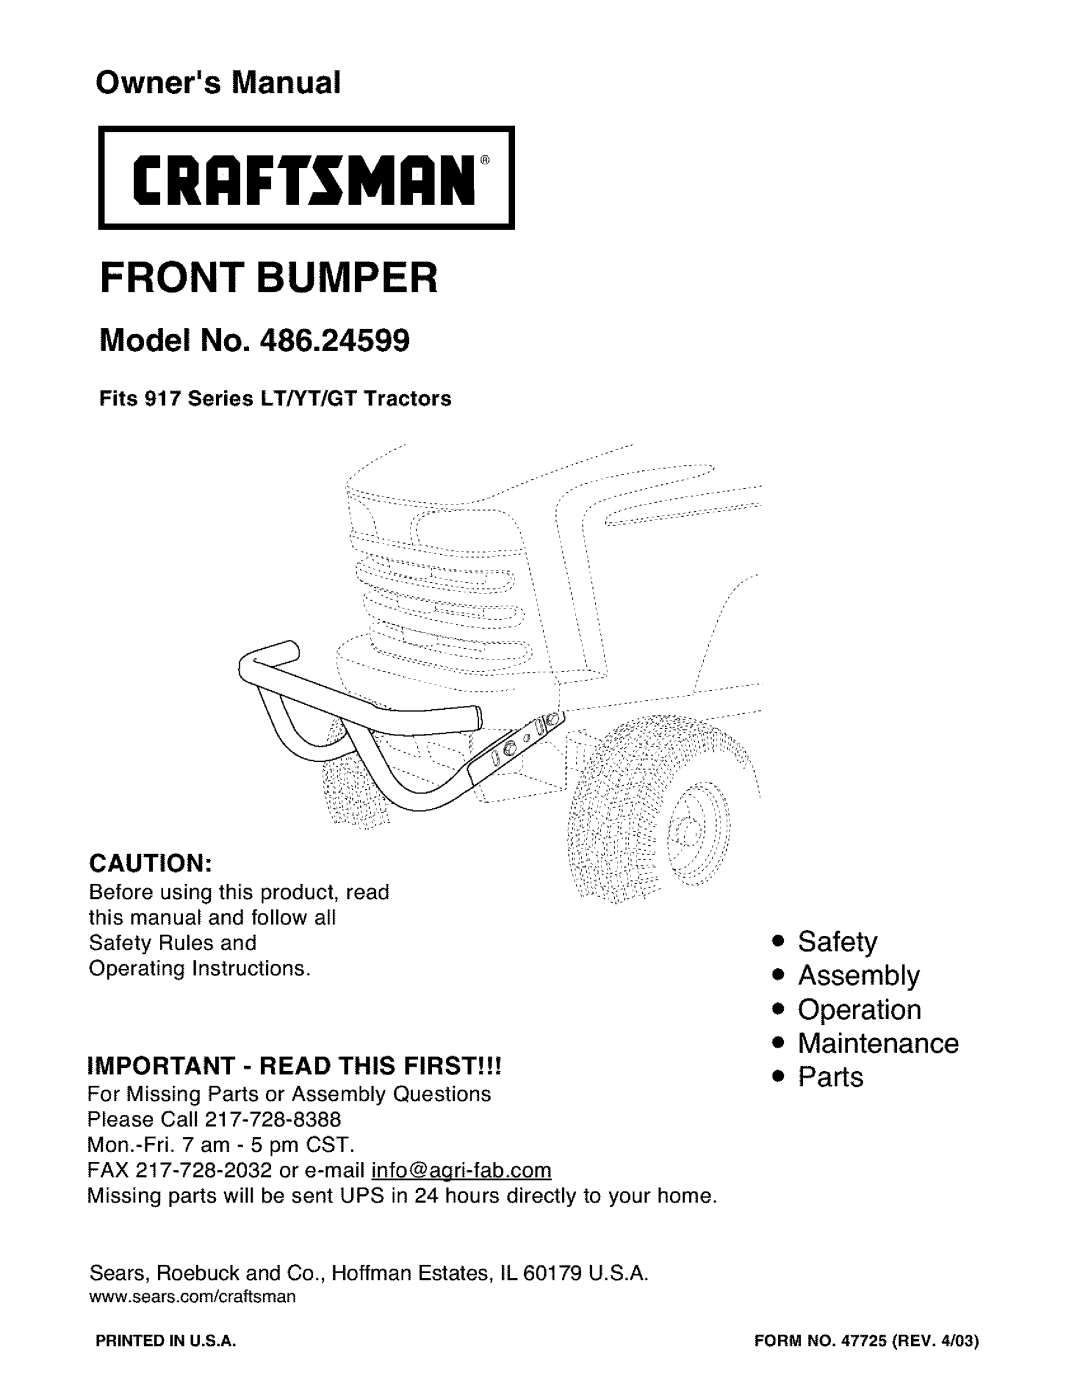 Craftsman 486.24599 owner manual Model No, Icri Iftshan, Front Bumper, Safety Assembly Operation Maintenance Parts 